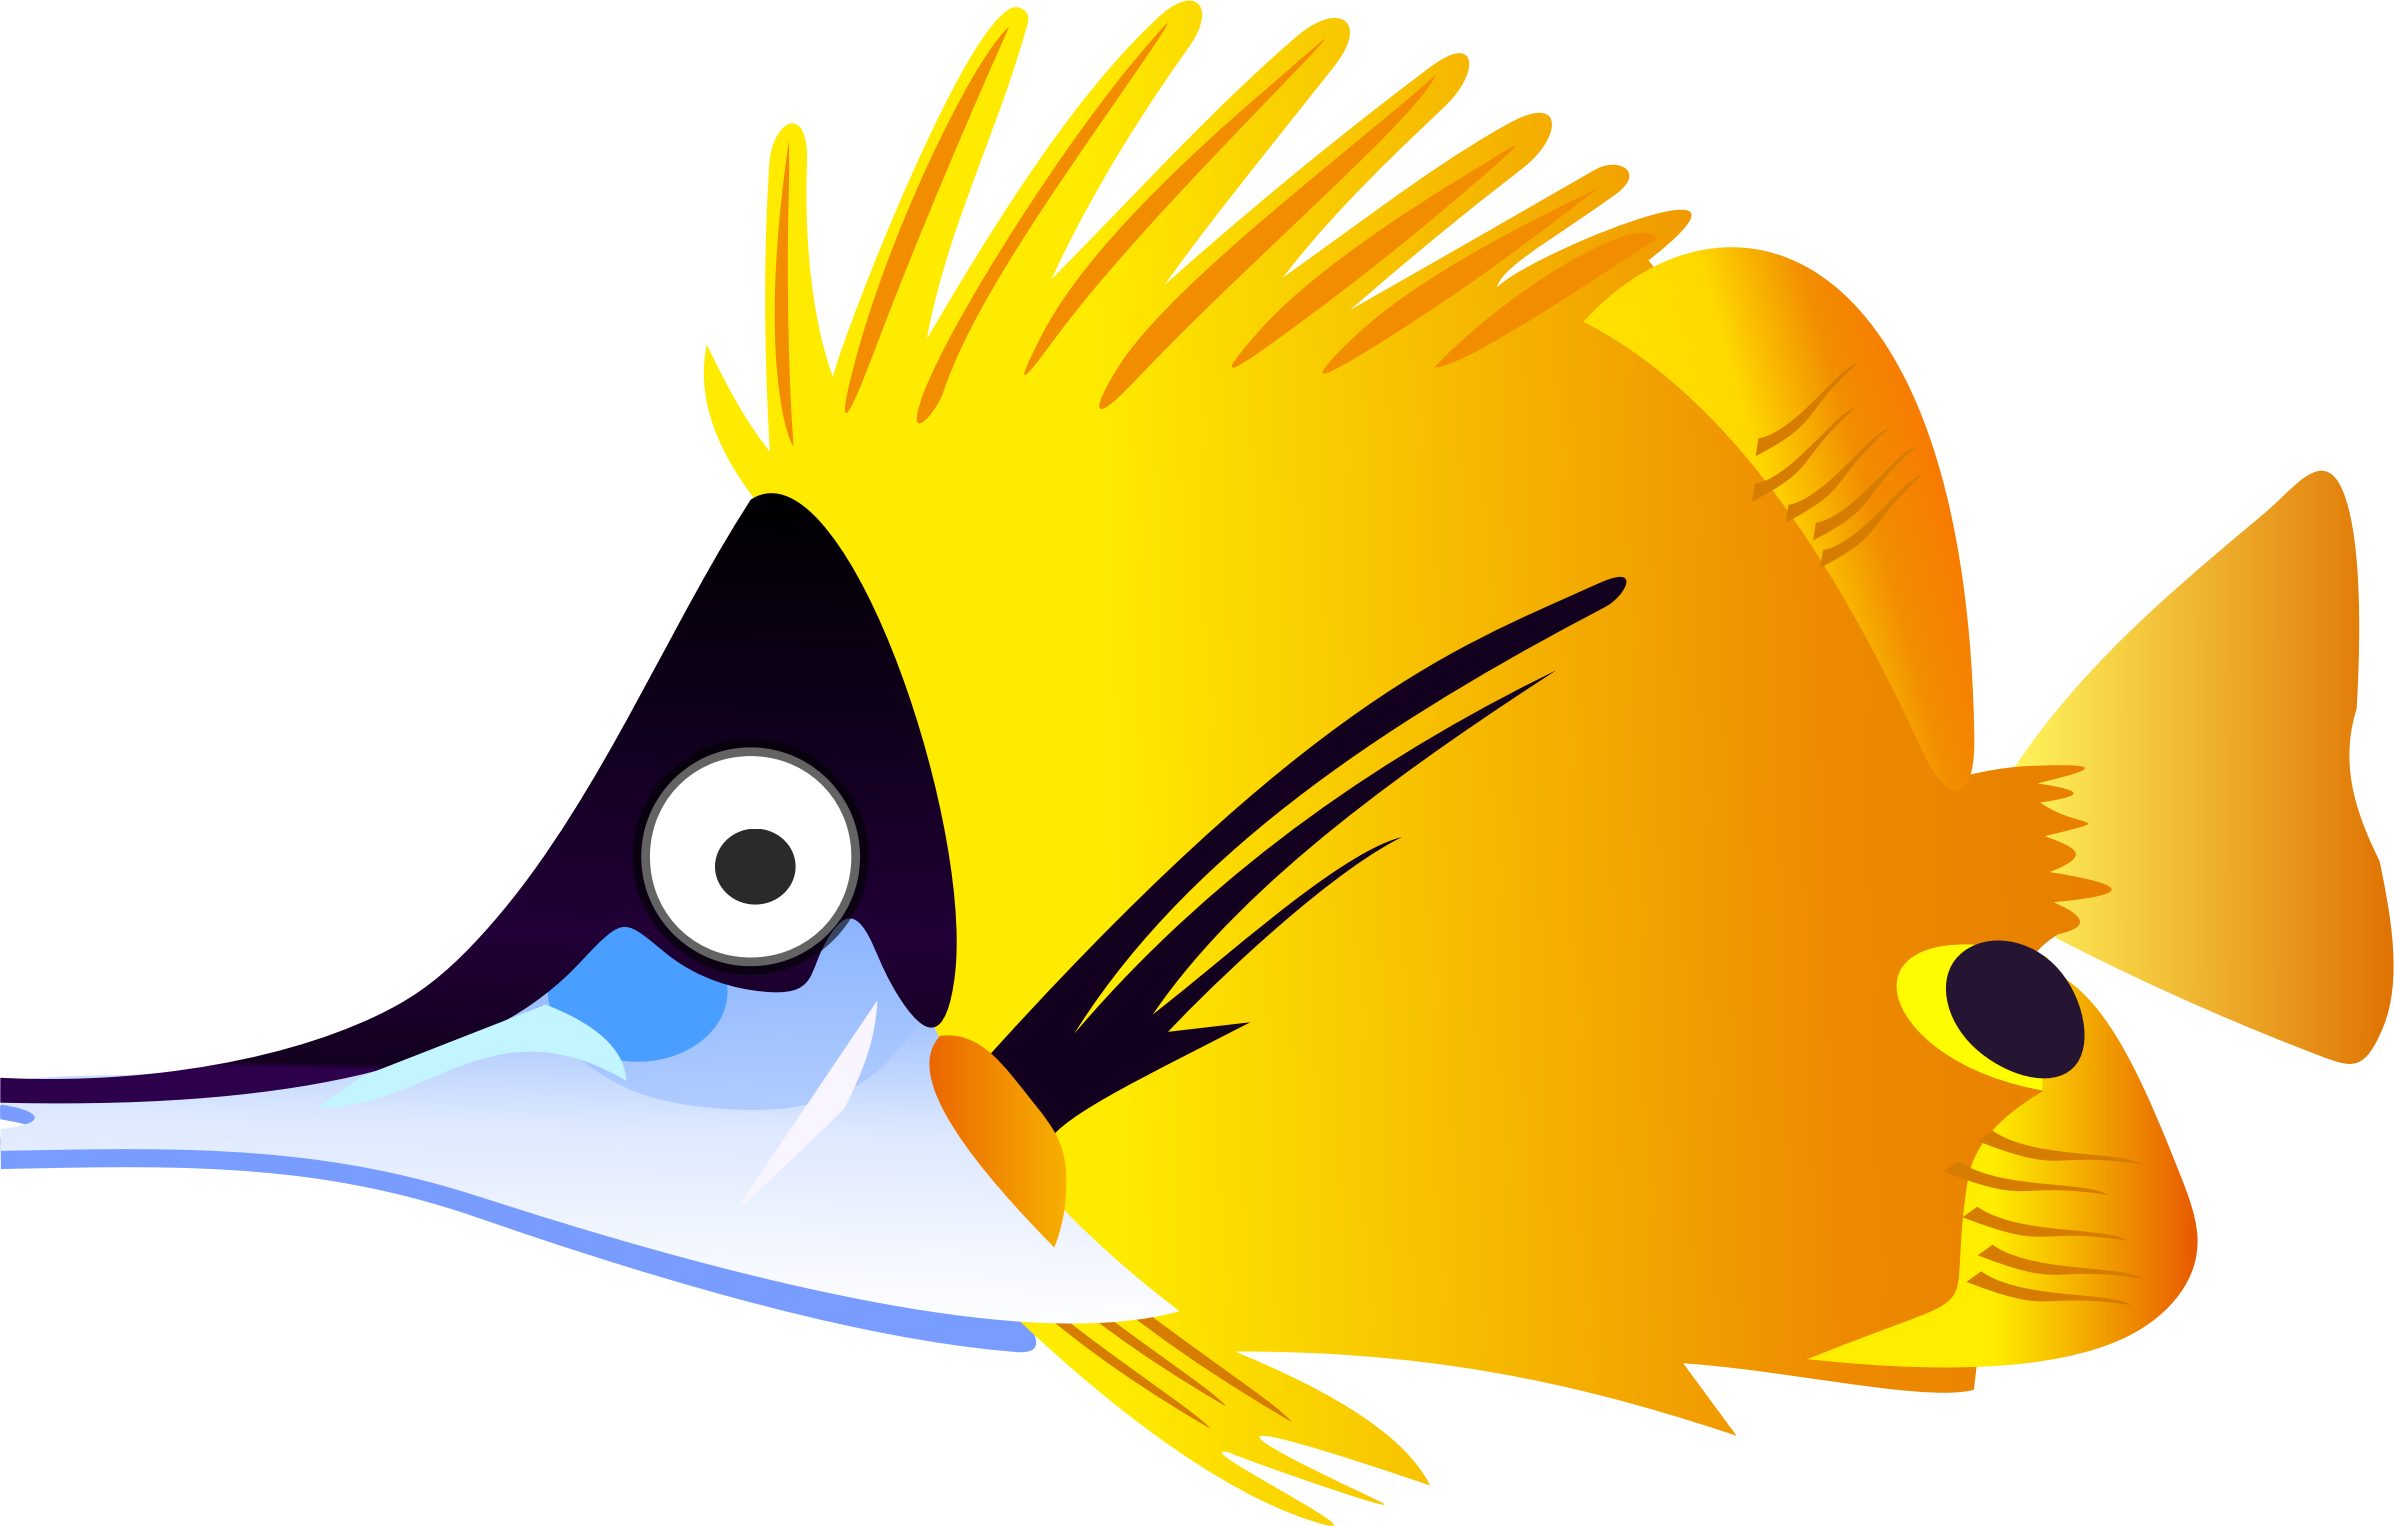 Download Yellow Fish Vector Clipart image - Free stock photo - Public Domain photo - CC0 Images